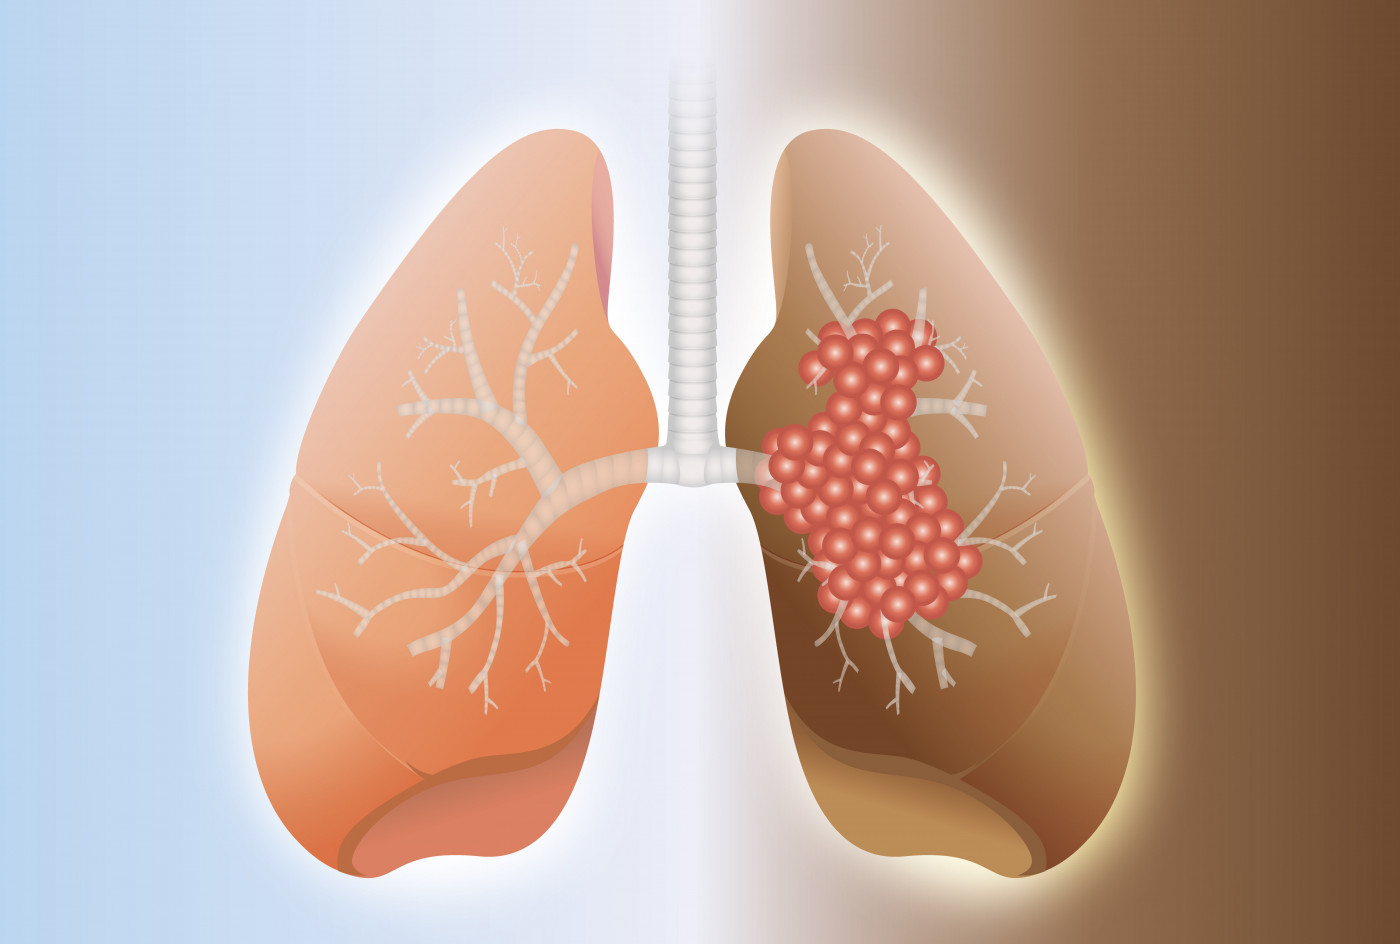 lung cancer and PAH